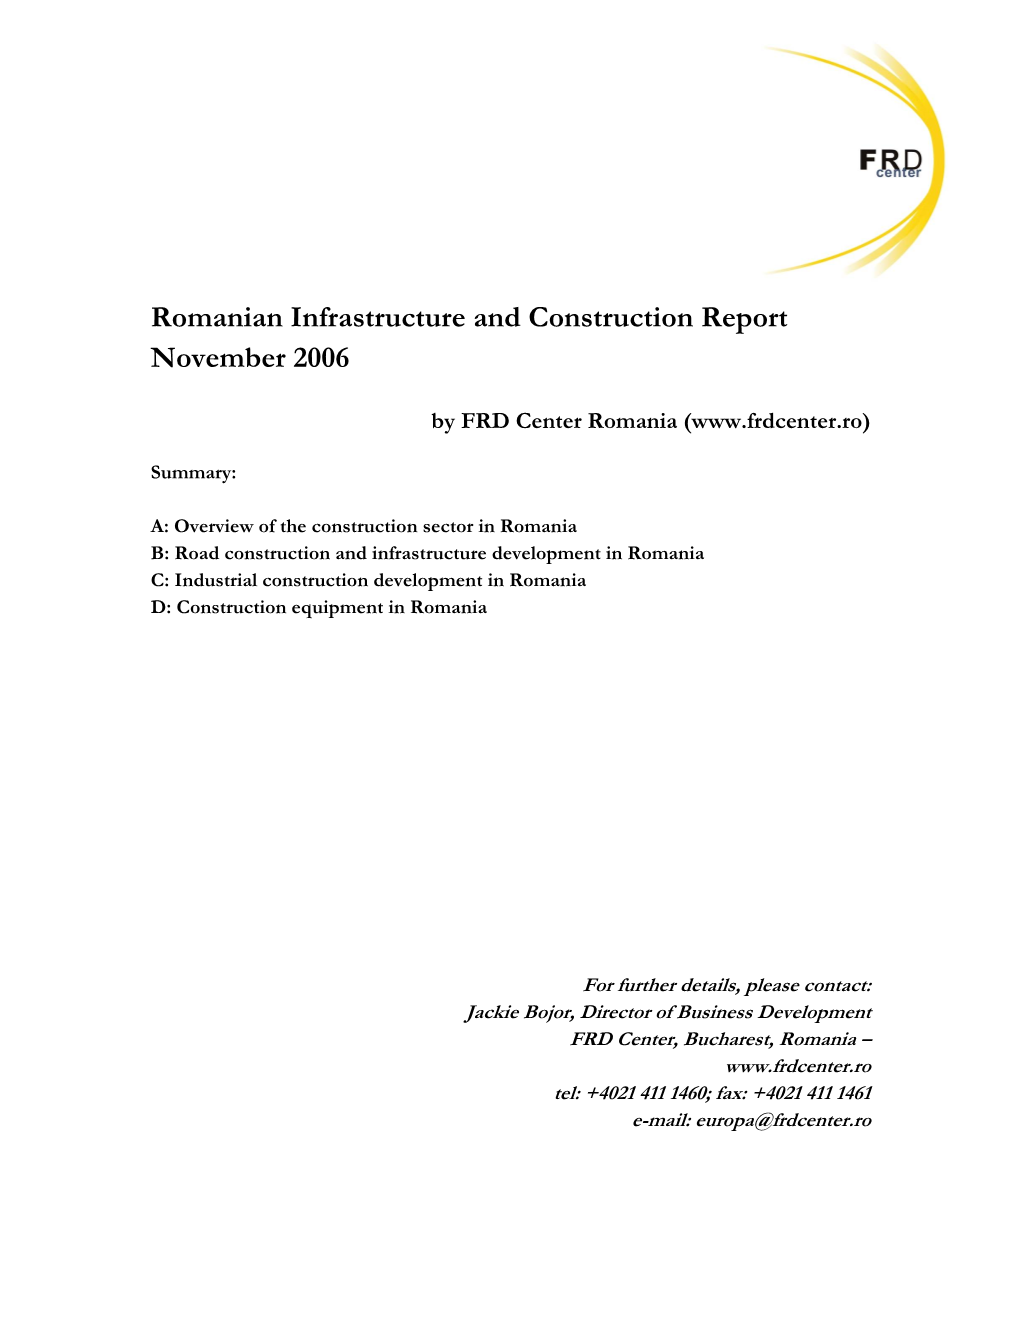 Romania Construction and Infrastructure Development